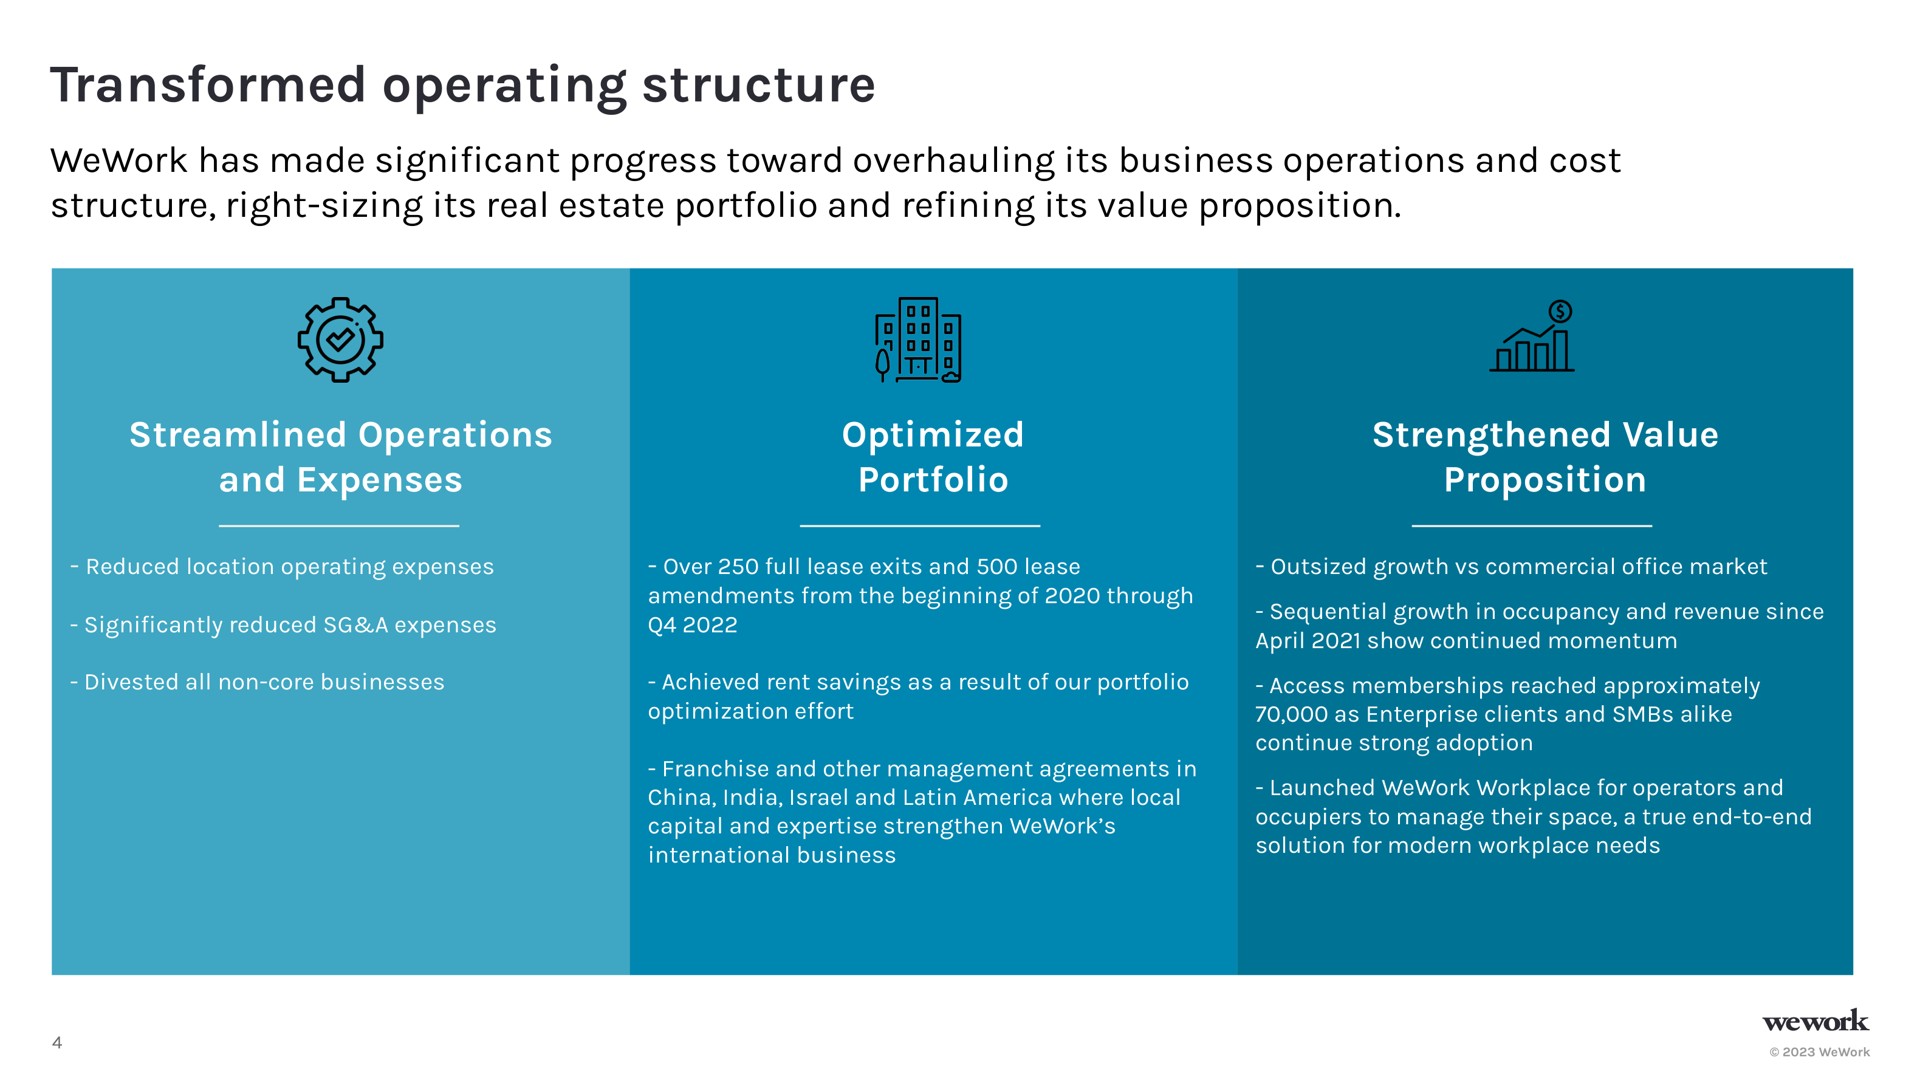 transformed operating structure has made cant progress toward overhauling its business operations and cost structure right sizing its real estate portfolio and its value proposition streamlined operations and expenses optimized portfolio strengthened value proposition | WeWork